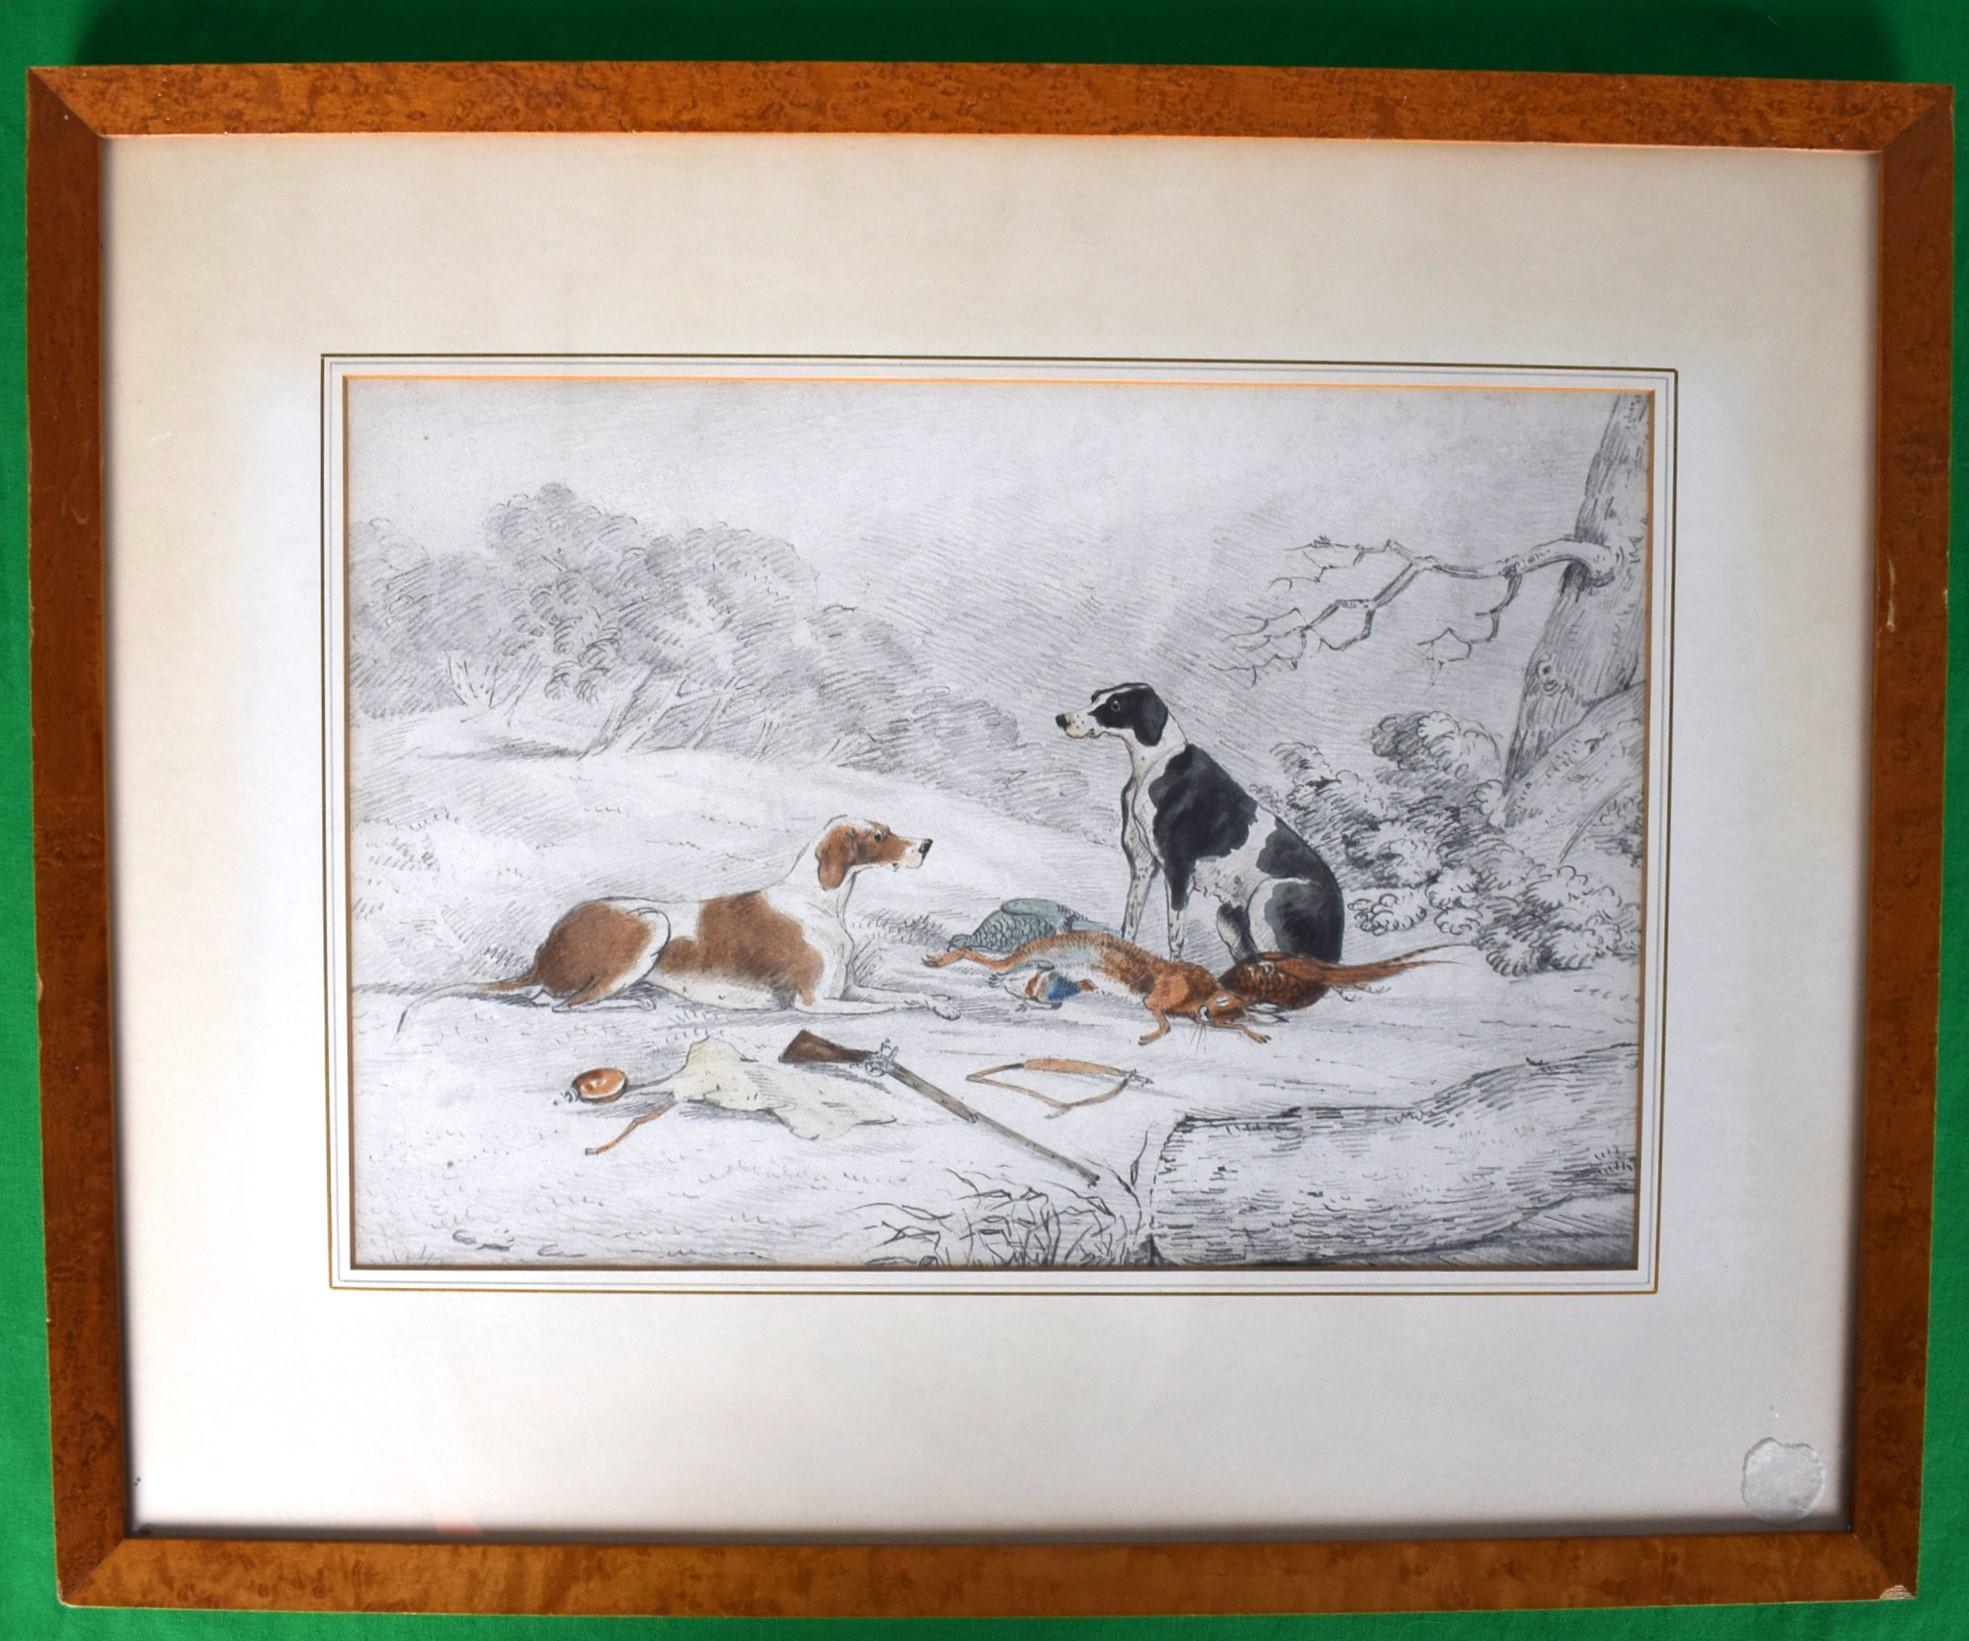 Art Sz: 9 7/8"H x 14 1/2"W

Frame Sz: 17 1/8"H x 21 1/4"W

Artist: Henry Alken

Provenance: 
The Sportsman's Gallery of Art and Books, Inc. 
7 East 55th Street New York 22, N.Y. 
(Label)